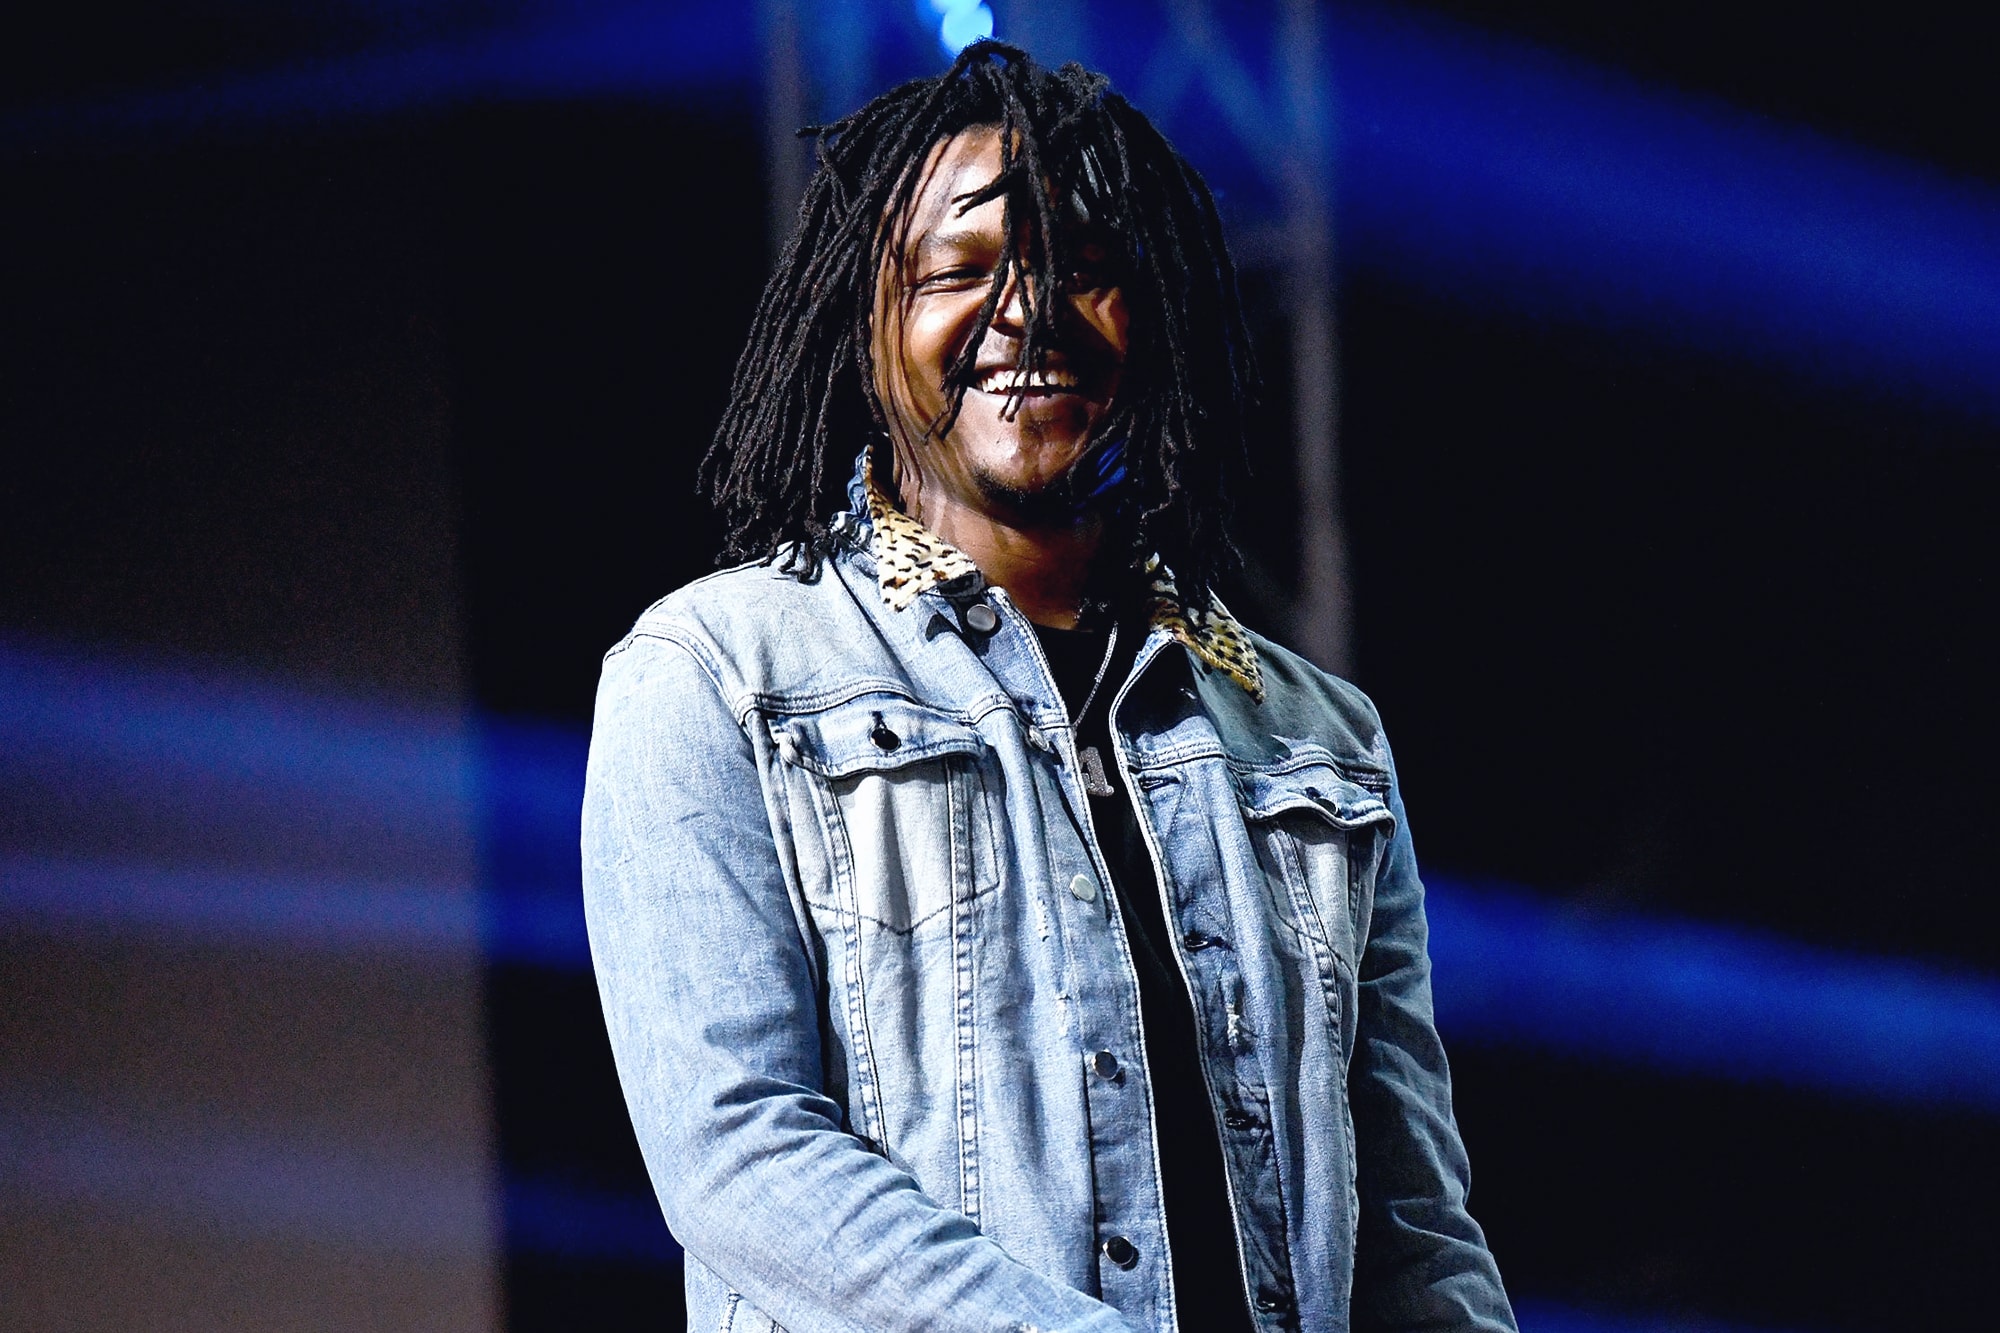 Young Nudy Releases New 'Anyways' Album Listen Stream Atlanta 21 Savage ATL No Go HYPEBEAST HipHop HipHopHeads Rap Music Georgia Pierre Bourne Best New Tracks